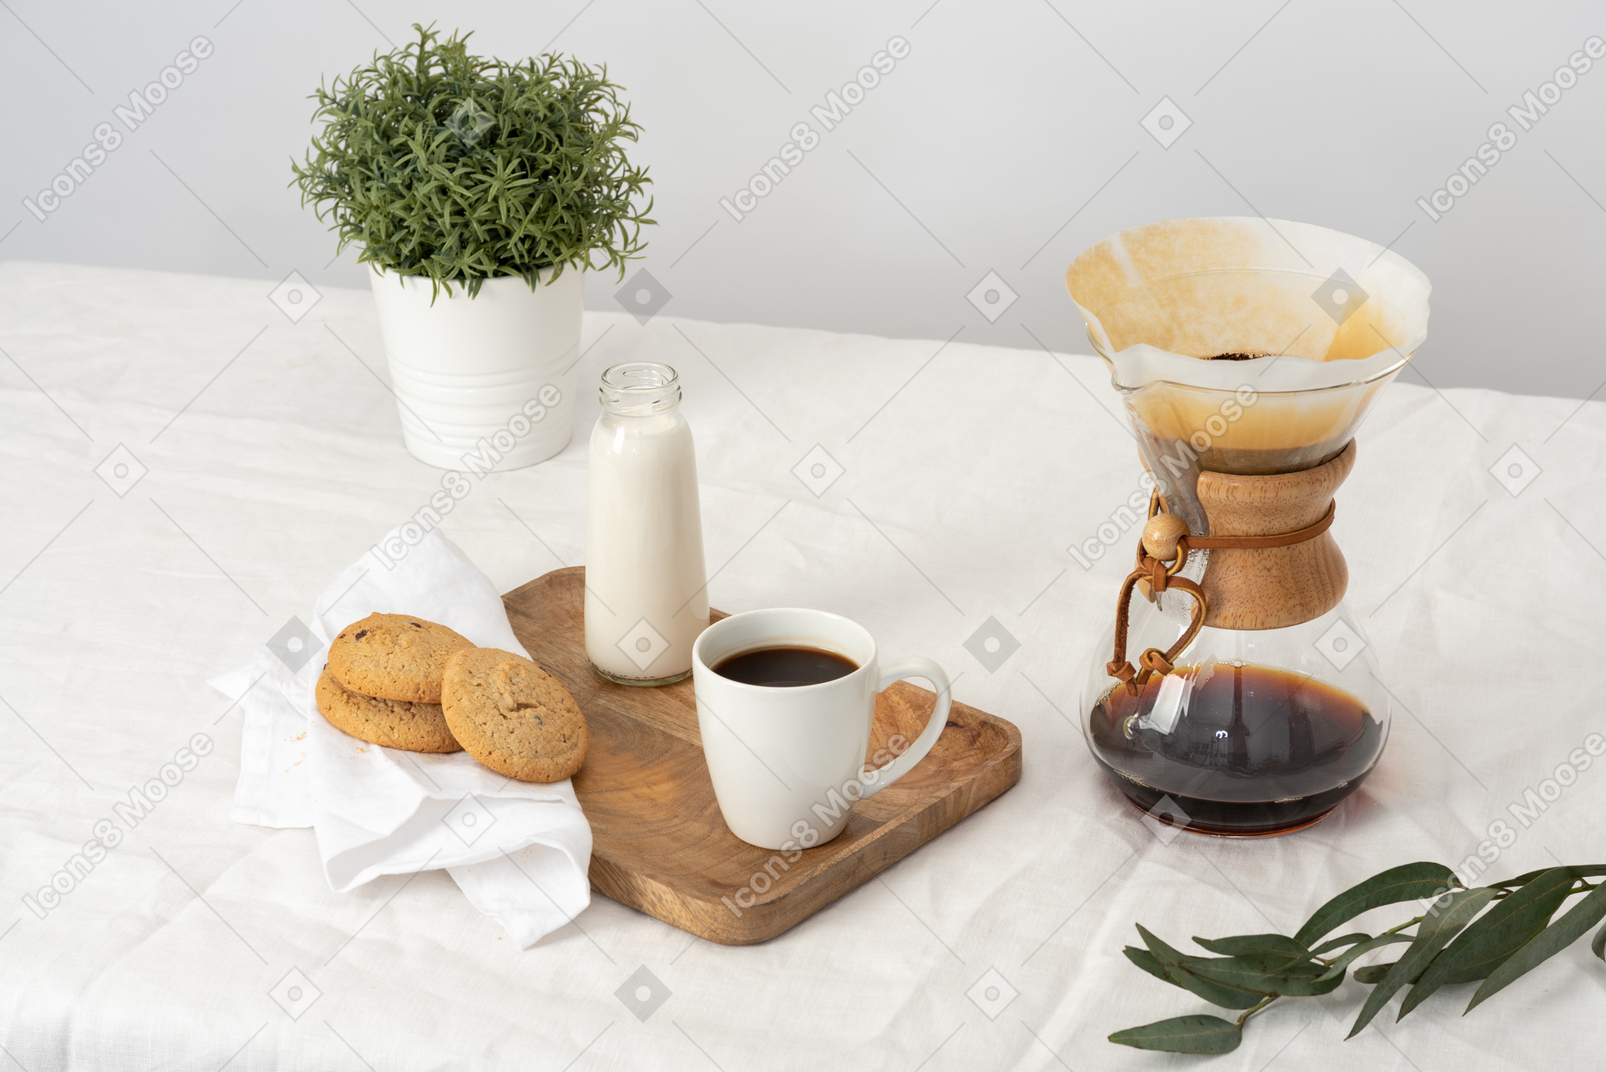 Chemex, large cup of coffee, bottle of milk, cookies and bottle of milk